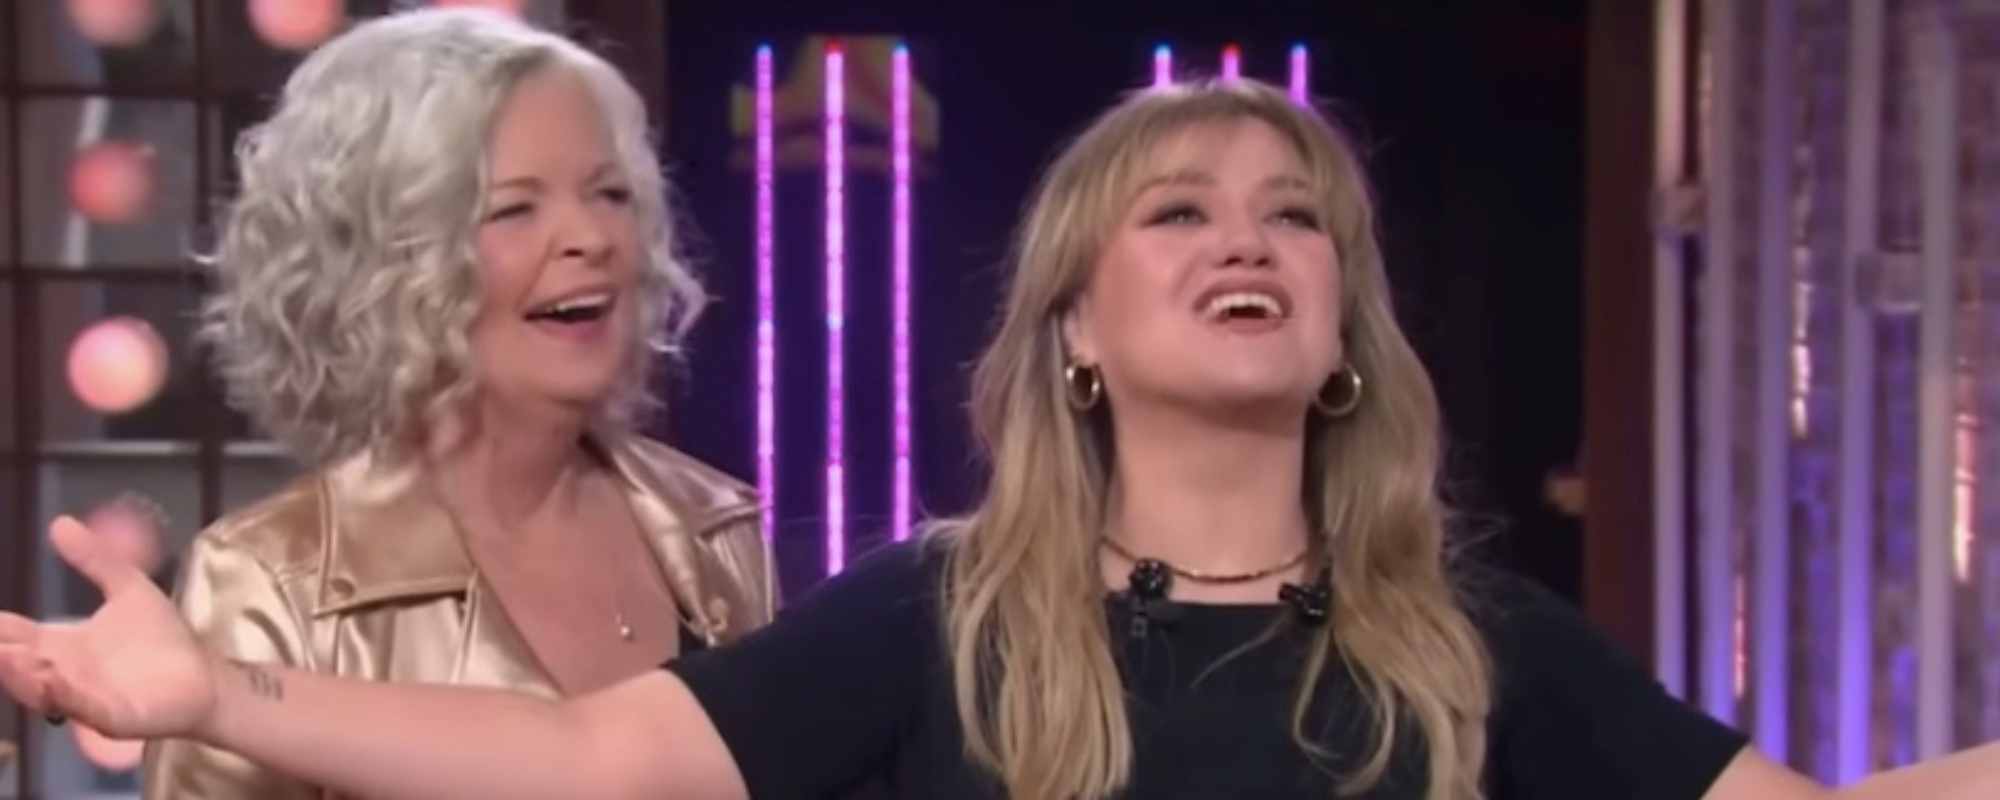 Watch: Kelly Clarkson and Viral Teacher Give High Energy Performance of “Superstition”